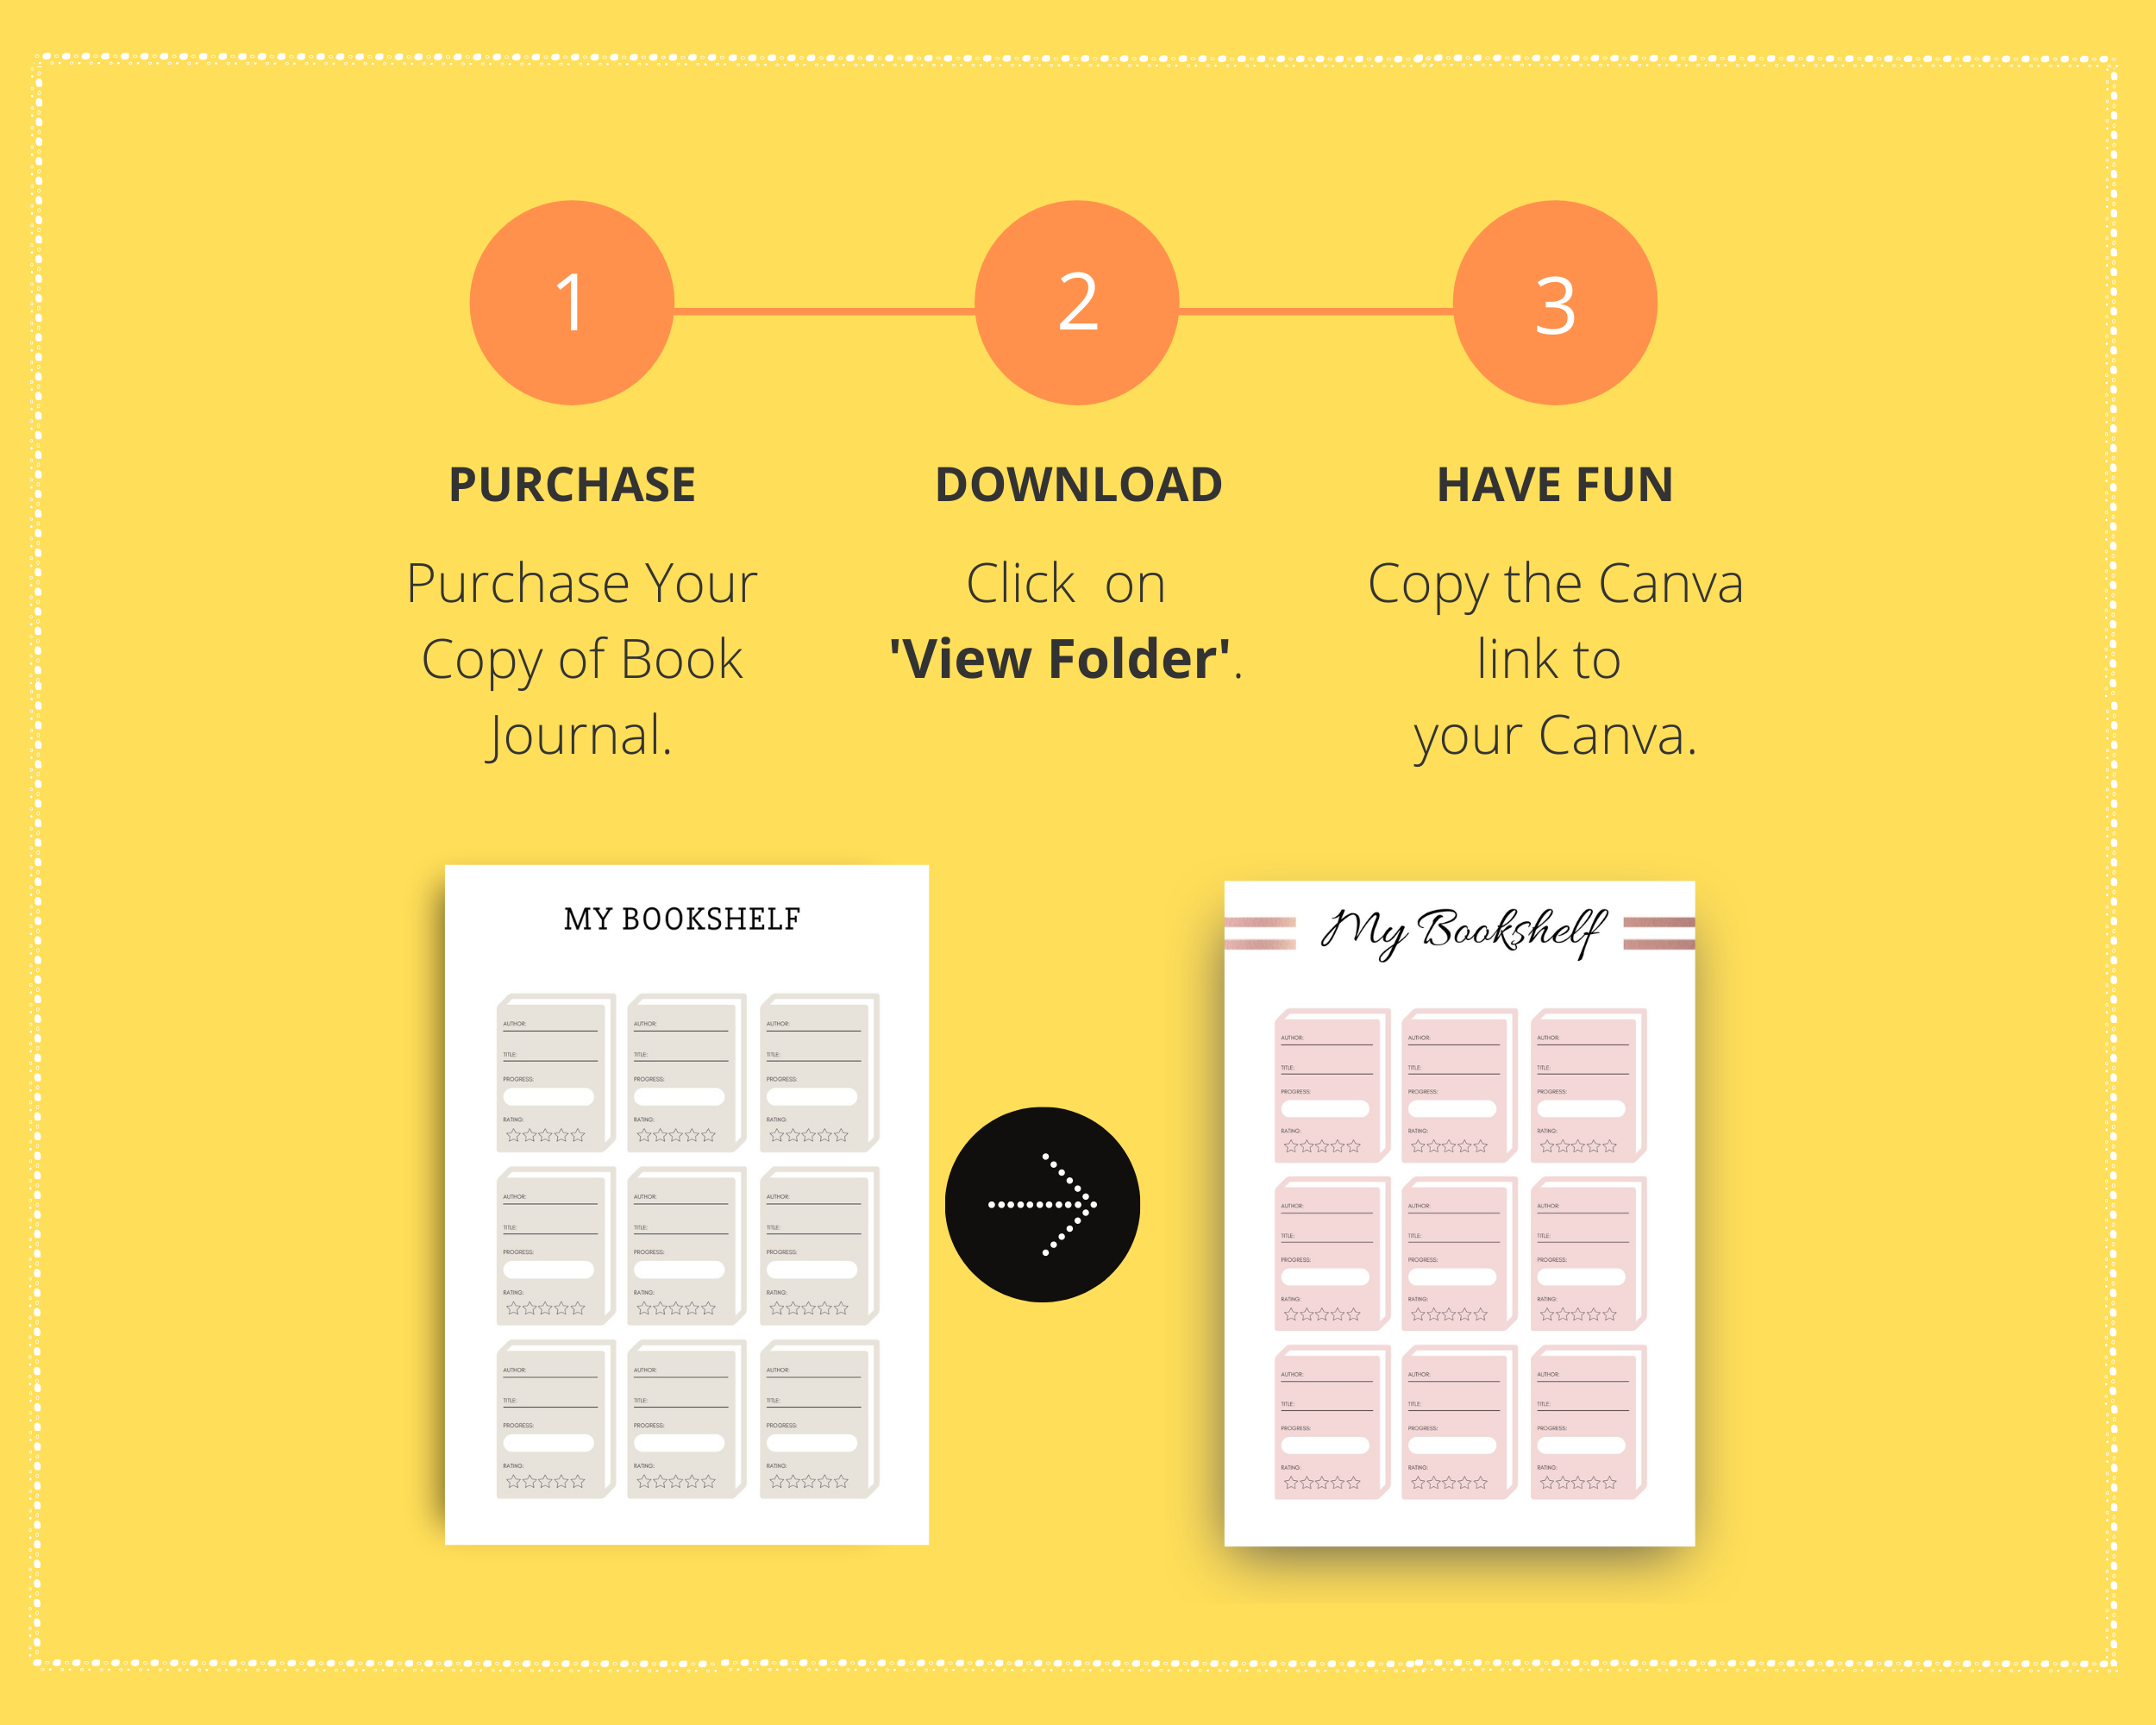 Editable Book Journal in Canva | Commercial Use